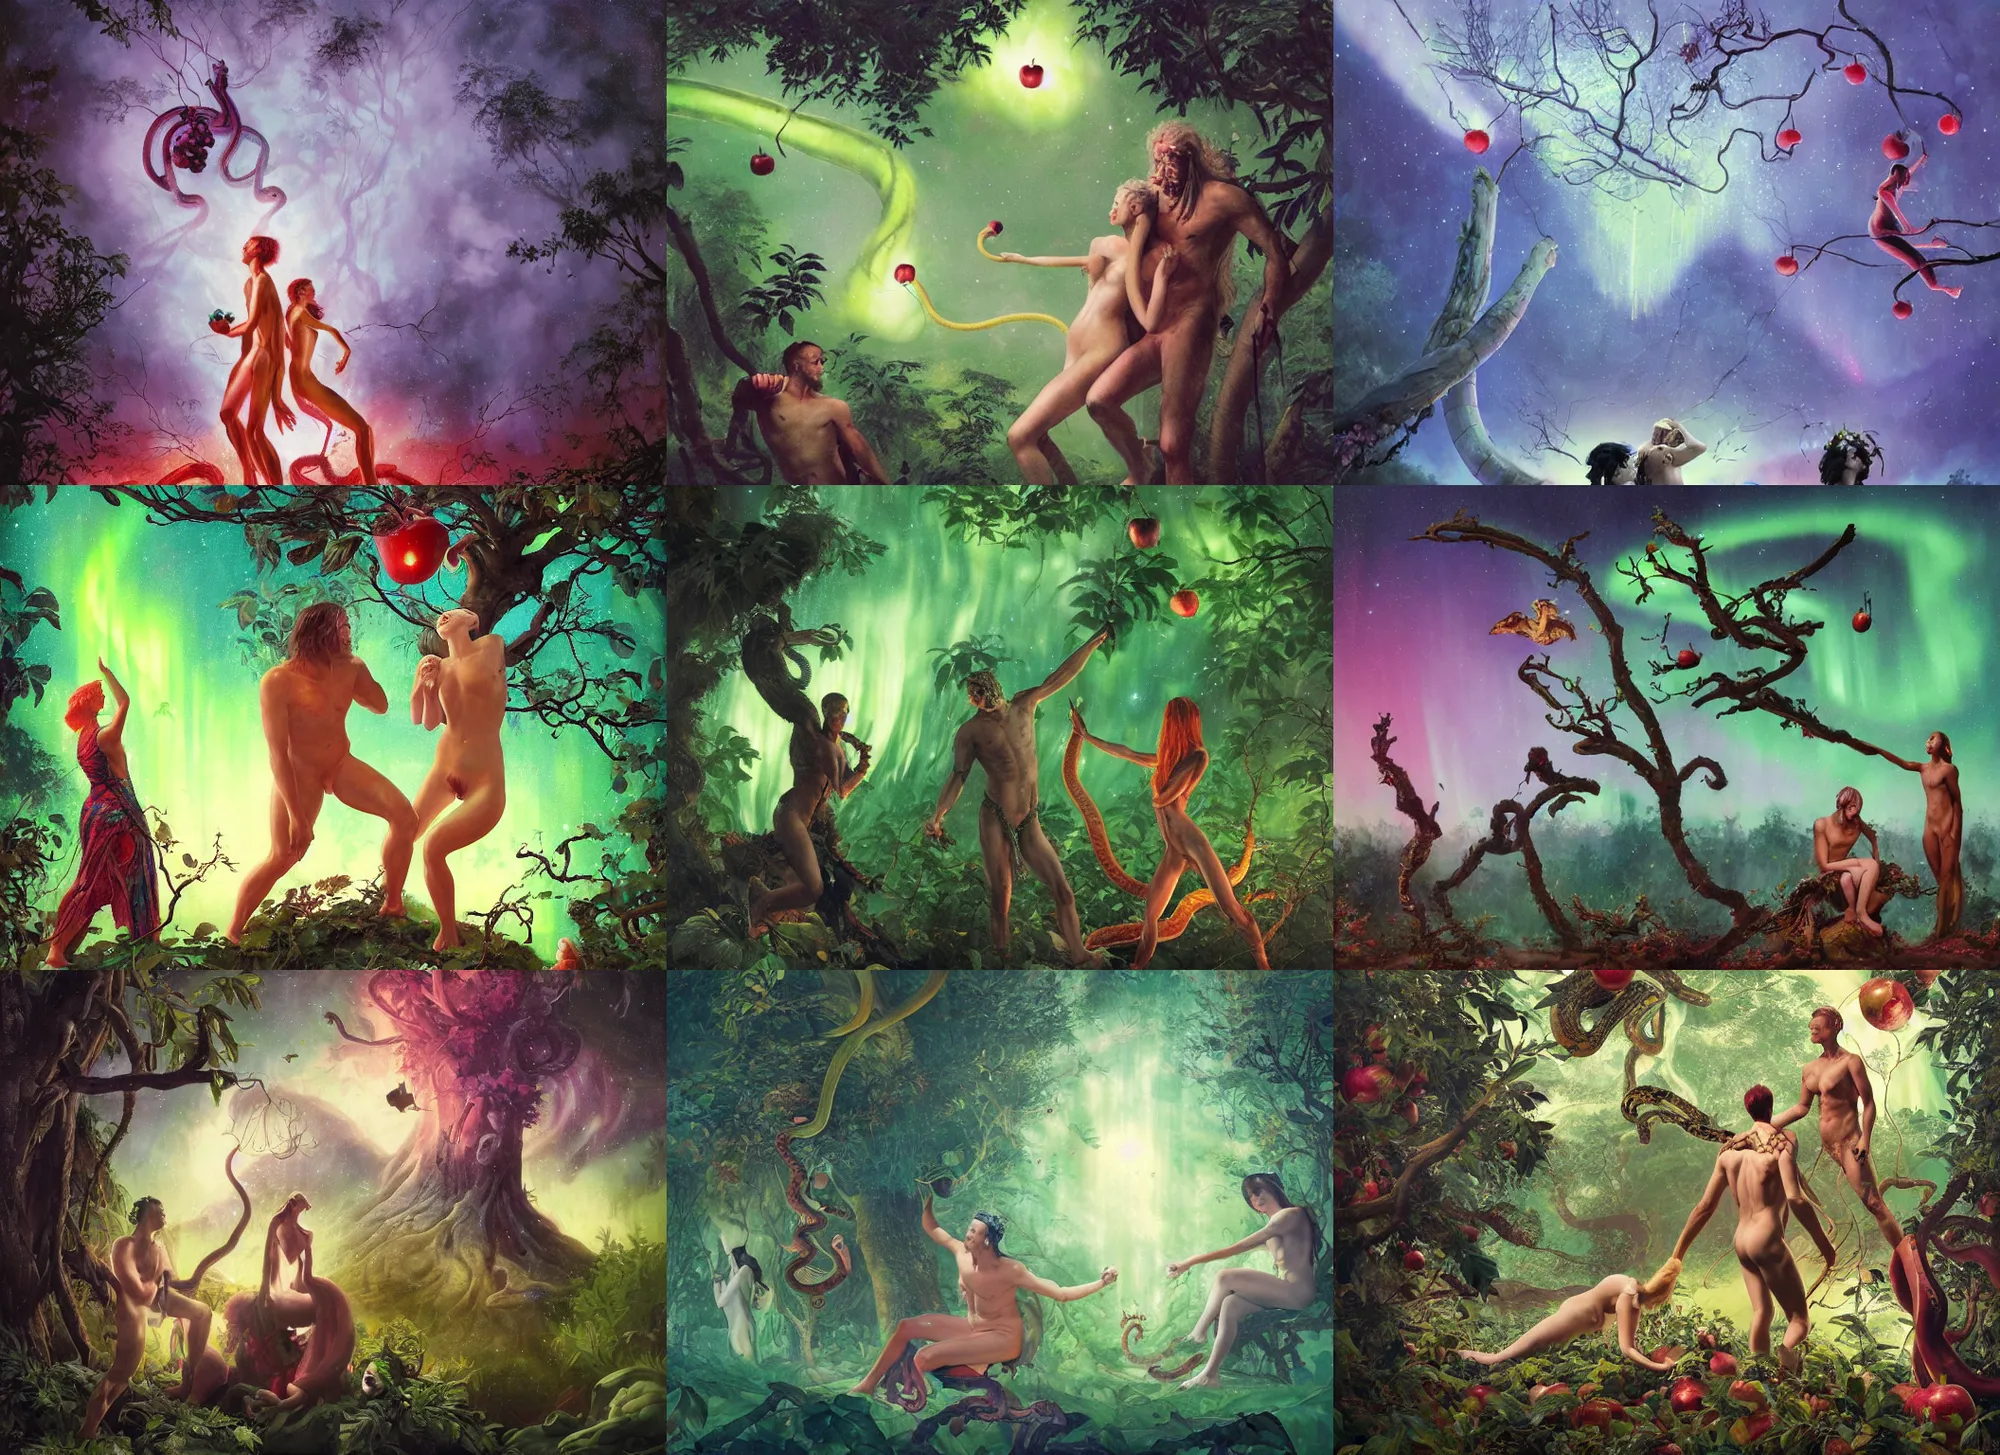 Prompt: adam and eve in a majestic luxurios singaporean forest picking an apple on a tree during aurora borealis, with an evil snake in the backdrop, by ruan jia, adim kashin, martine johanna, yoann lossel, jakub rebelka, james jean, rule of thirds, sia look, intricate,